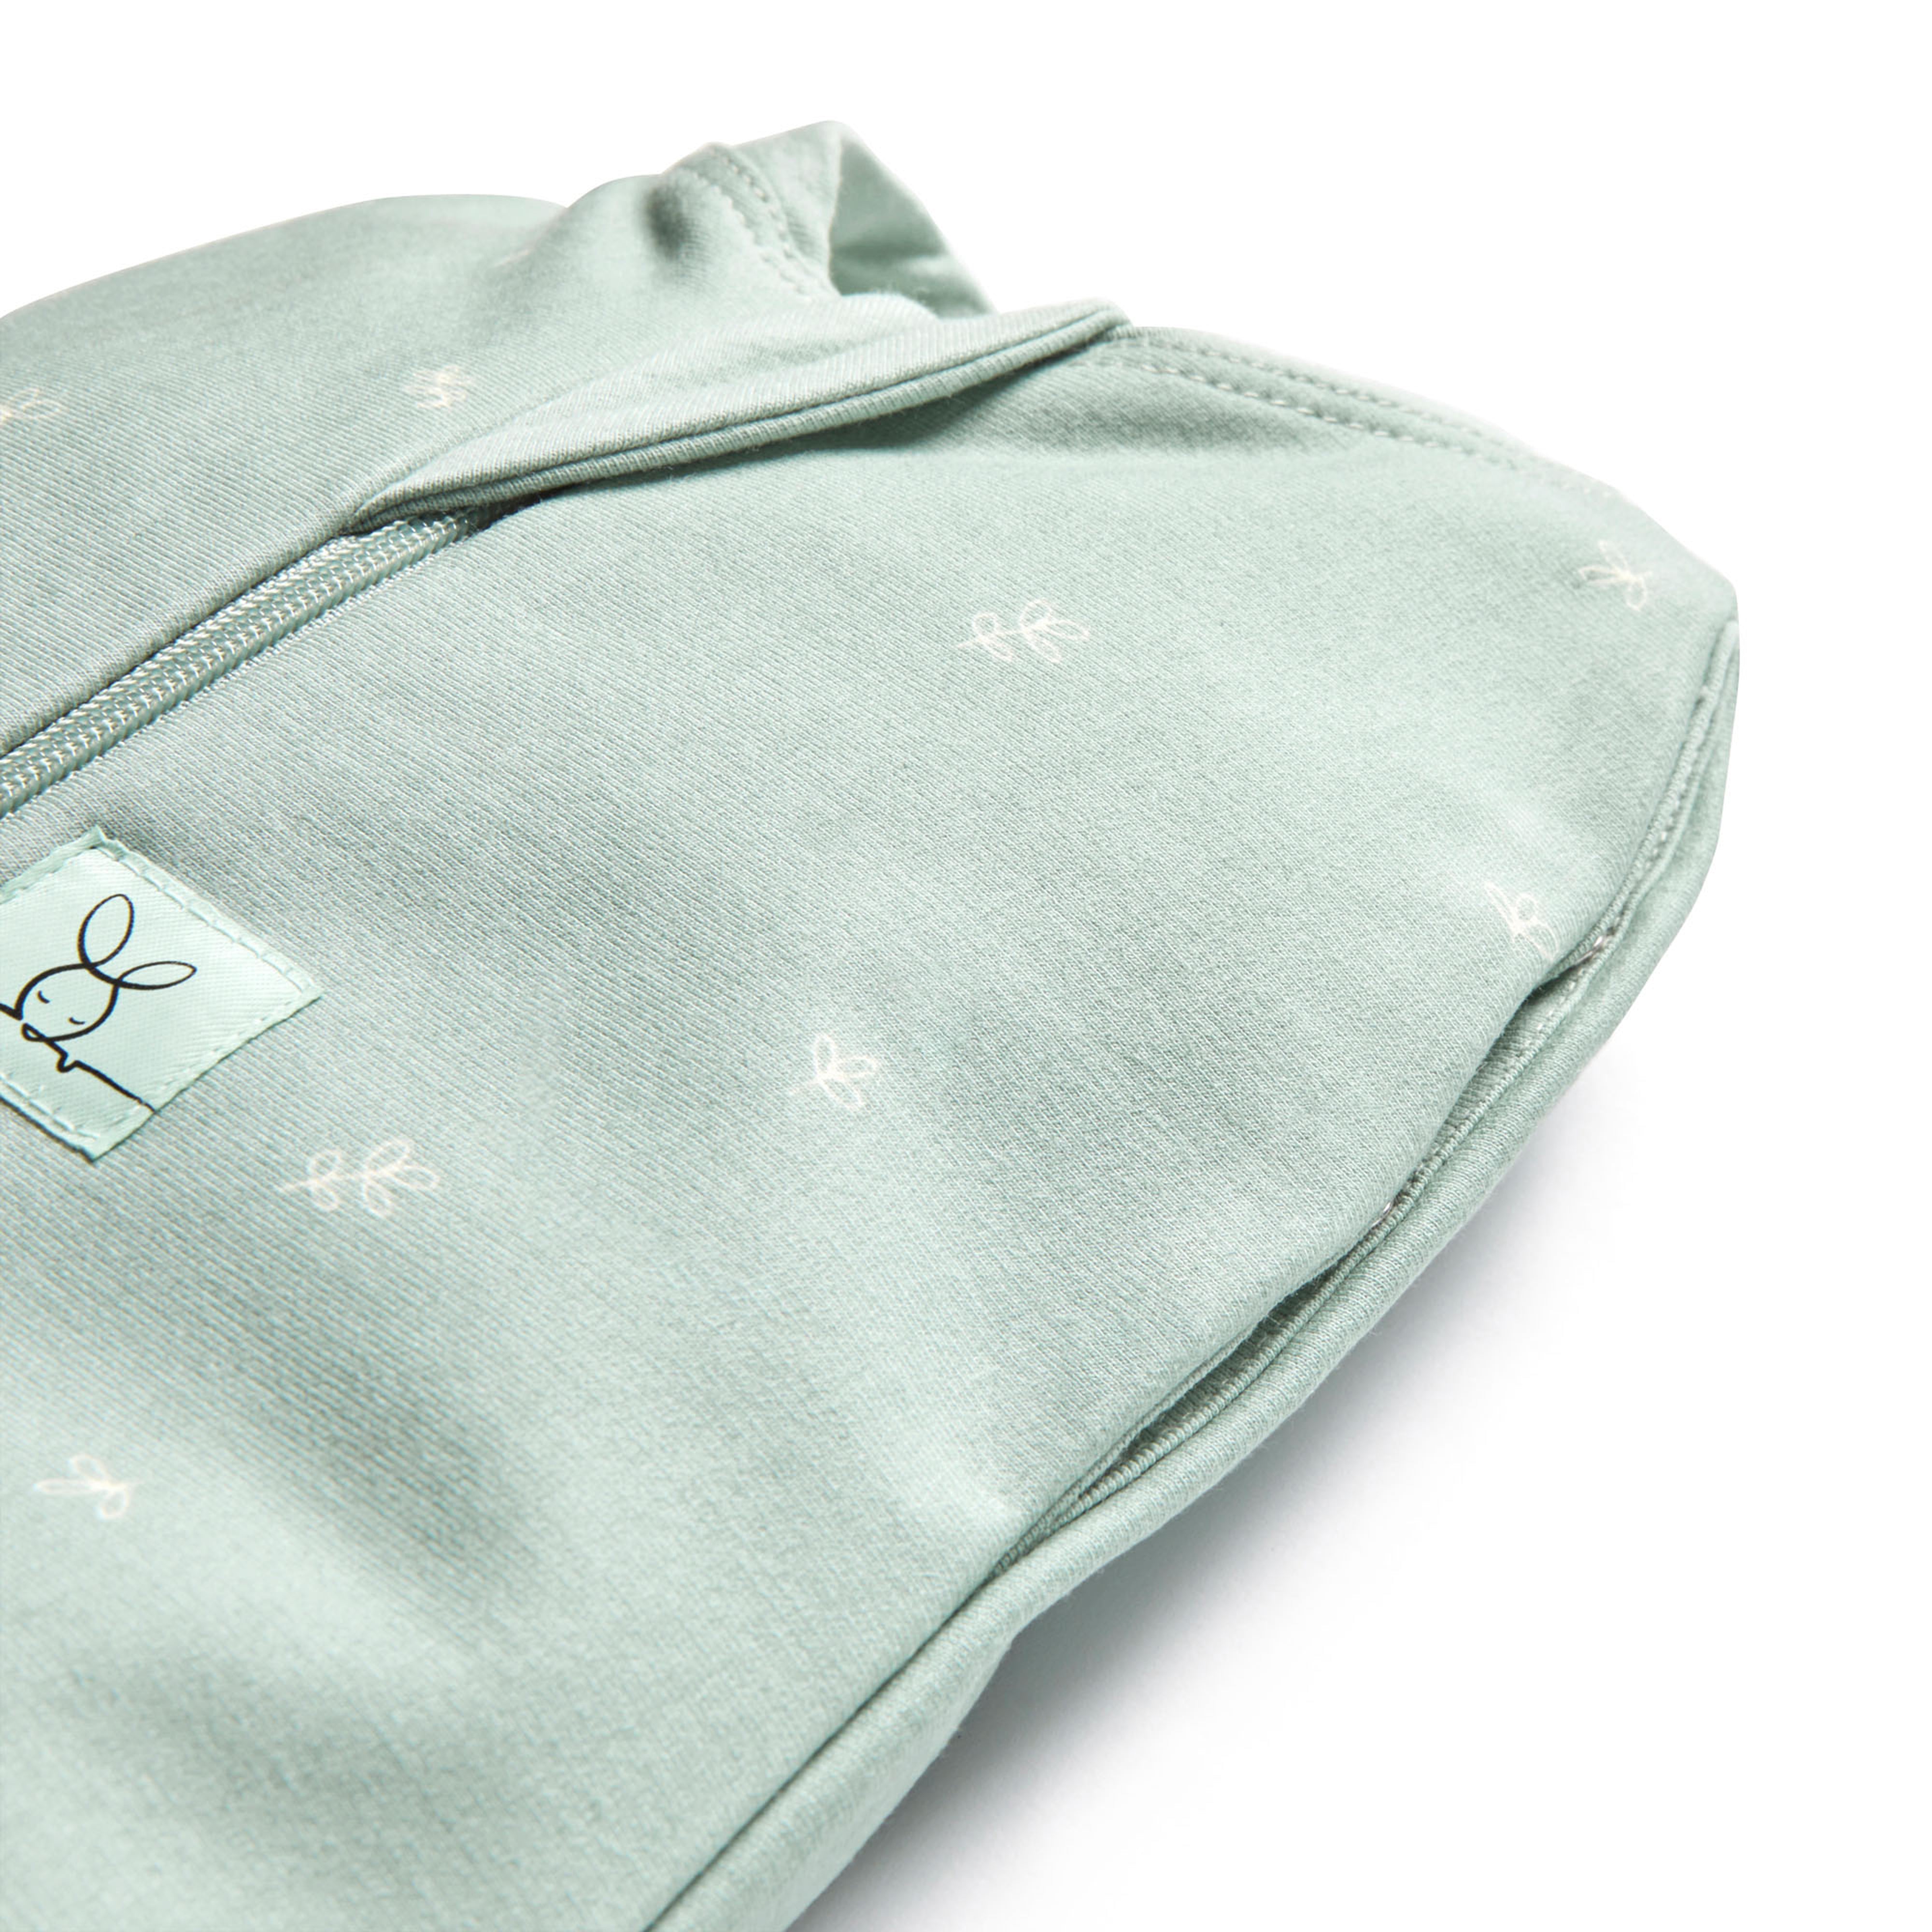 ergopouch-cocoon-swaddle-bag-1-0-tog-berries-ergo-zepco-1-0t00-03mbe20- (7)